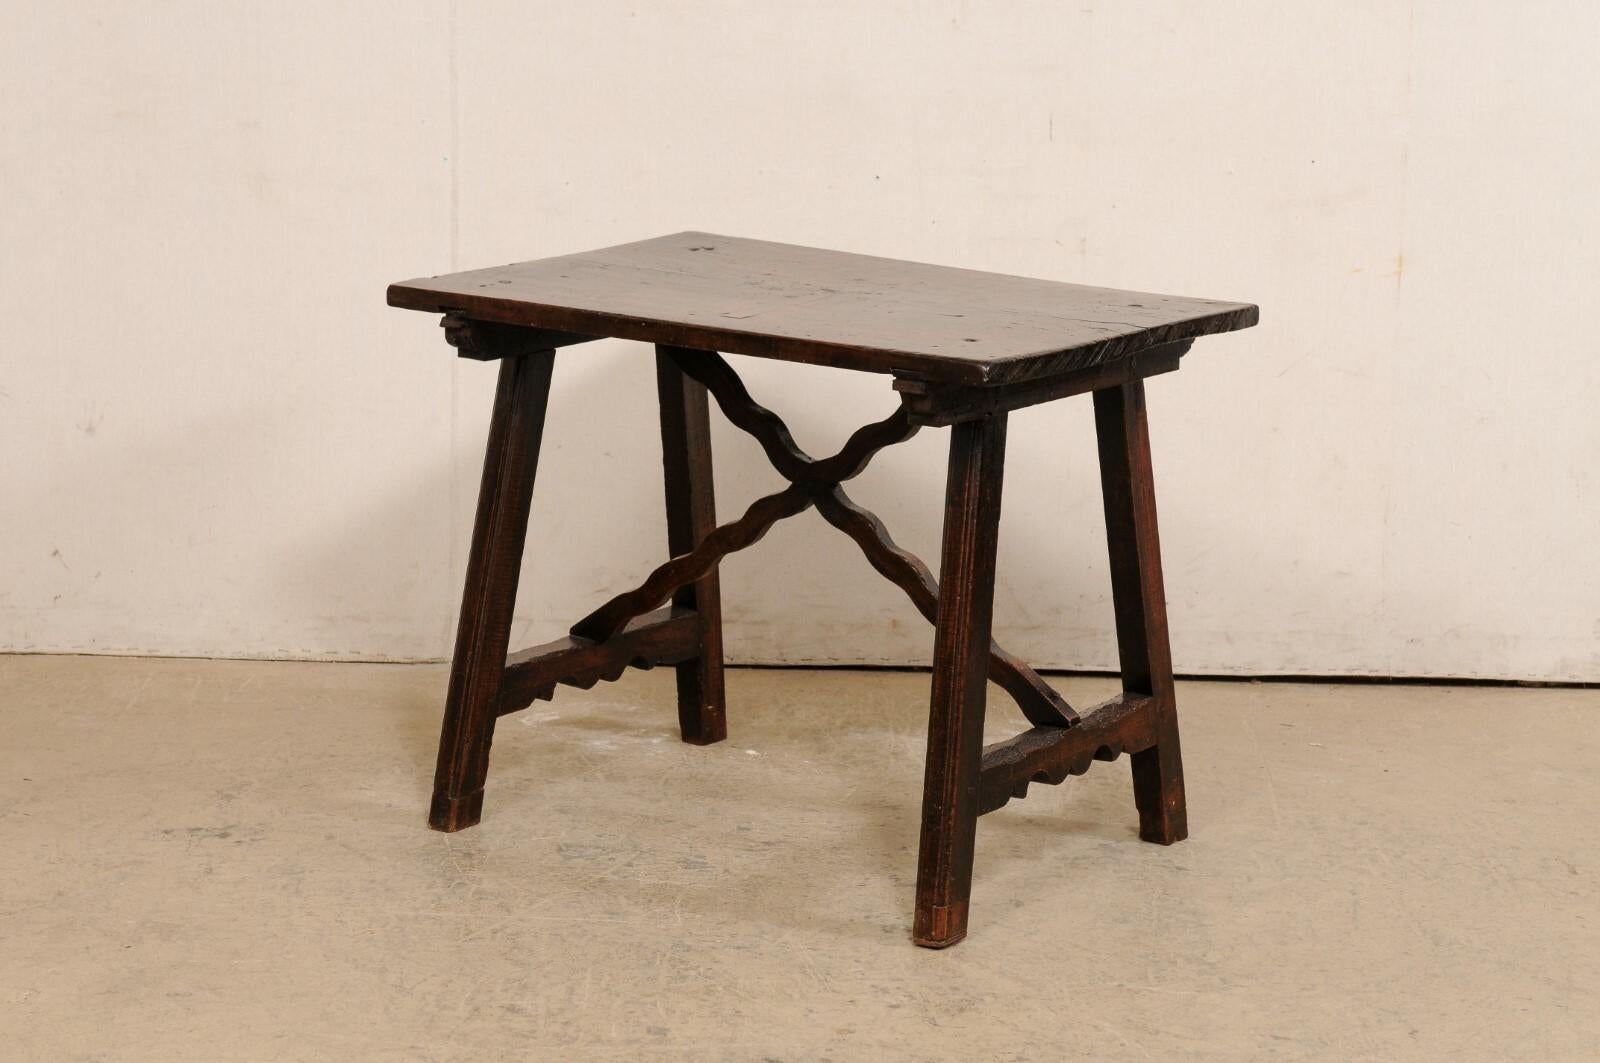 18th C. Spanish Table with a Wavy X-Stretcher at Underside For Sale 1